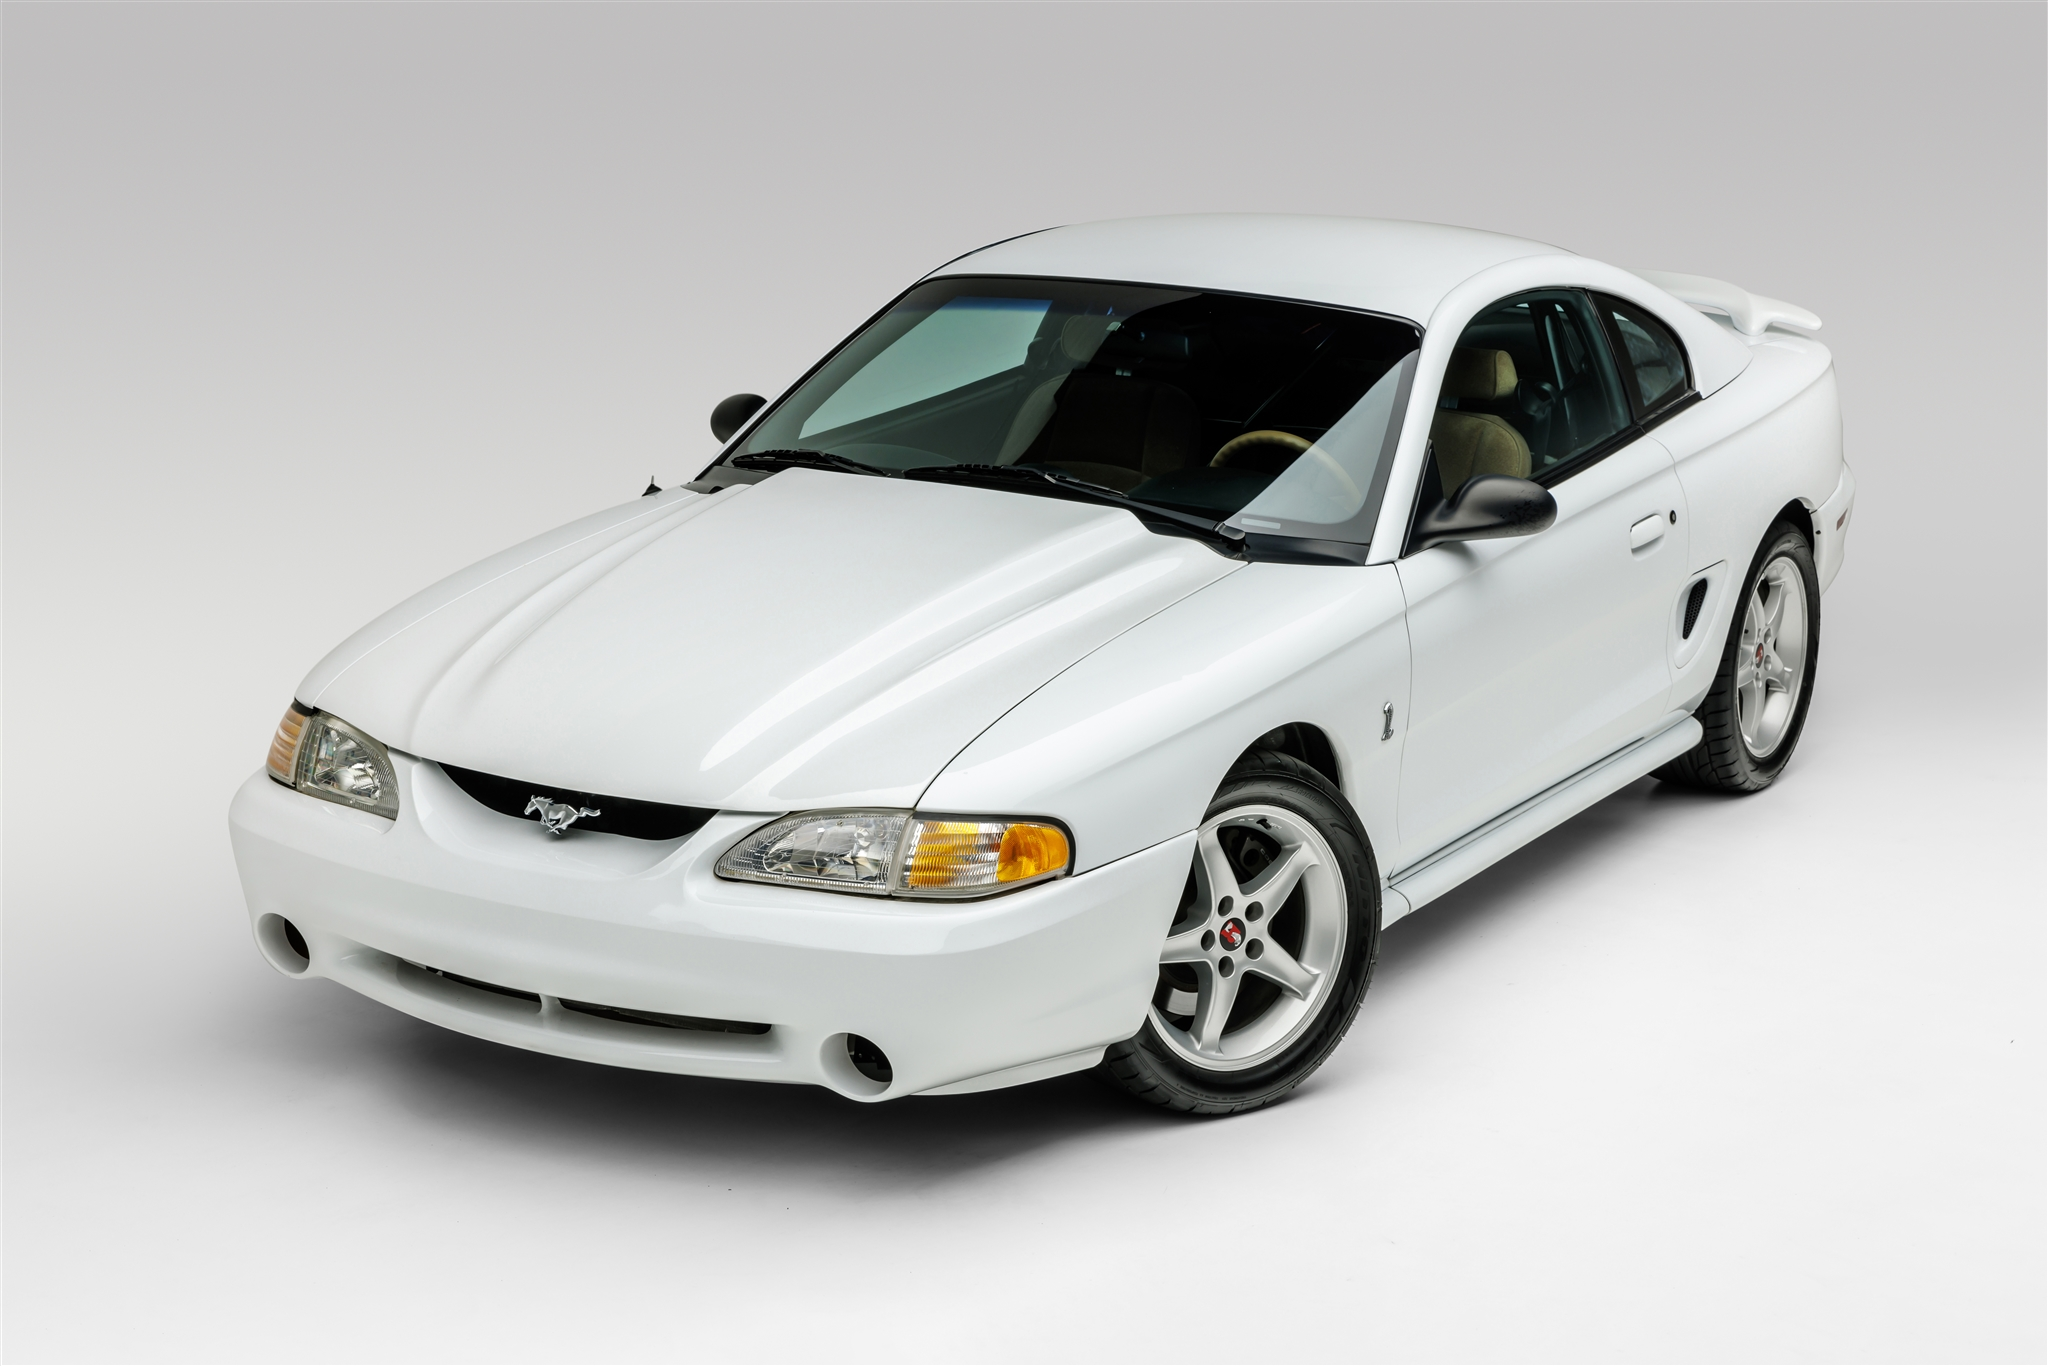 Mustang Of The Day: 1995 Ford Mustang SVT Cobra R